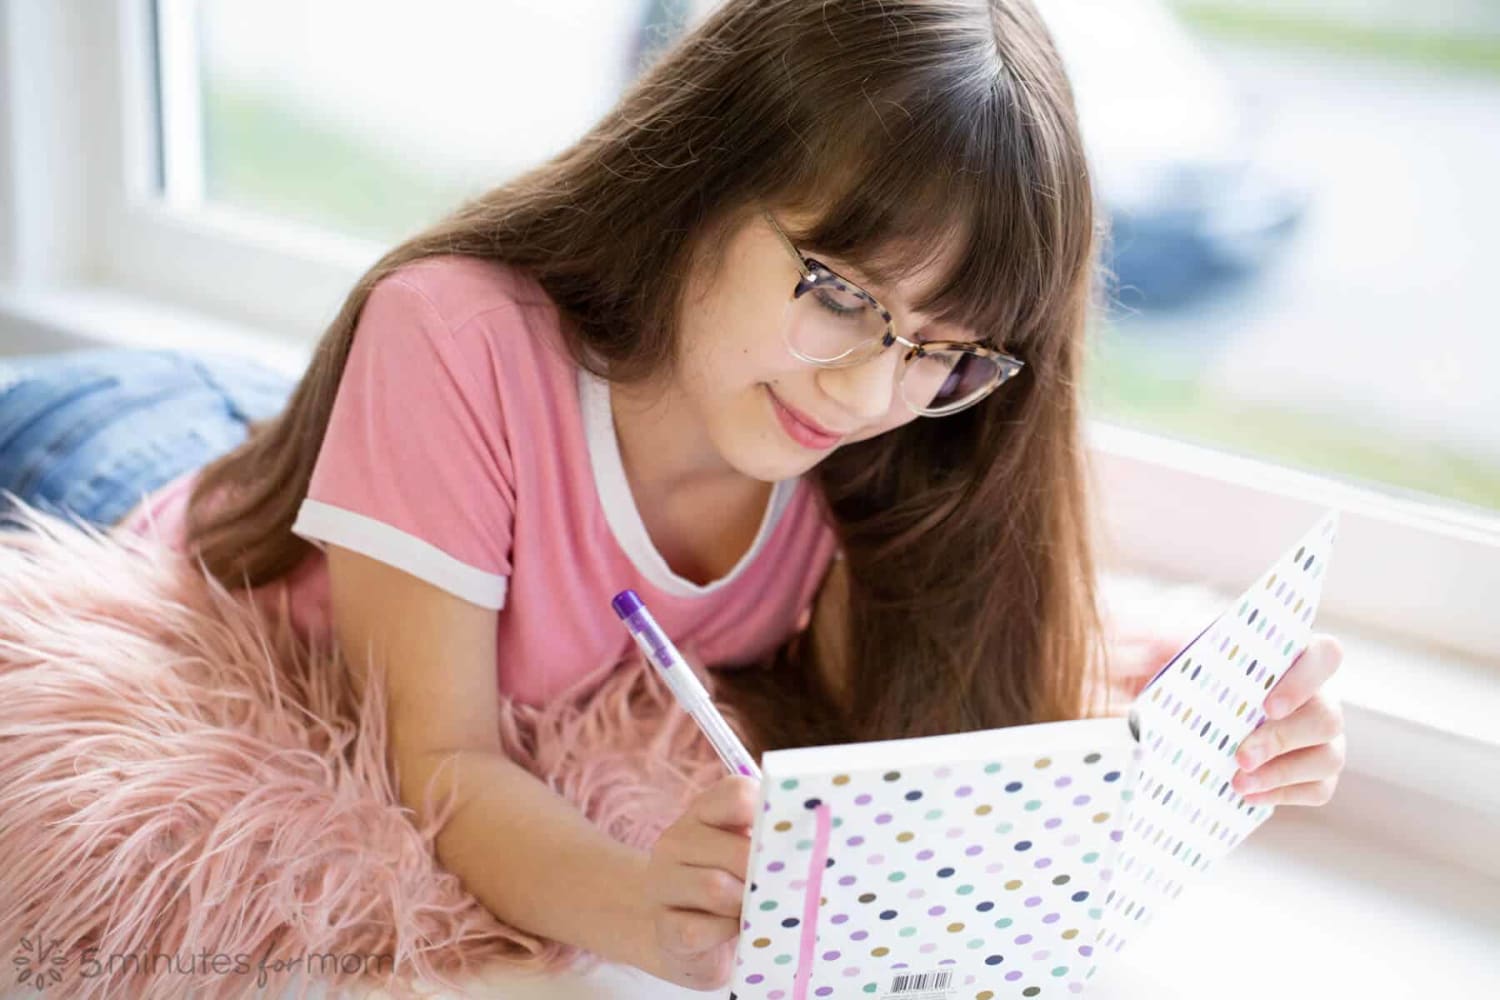 How To Get Kids Writing While They Are Home From School - Free Resources To Improve Writing Skills